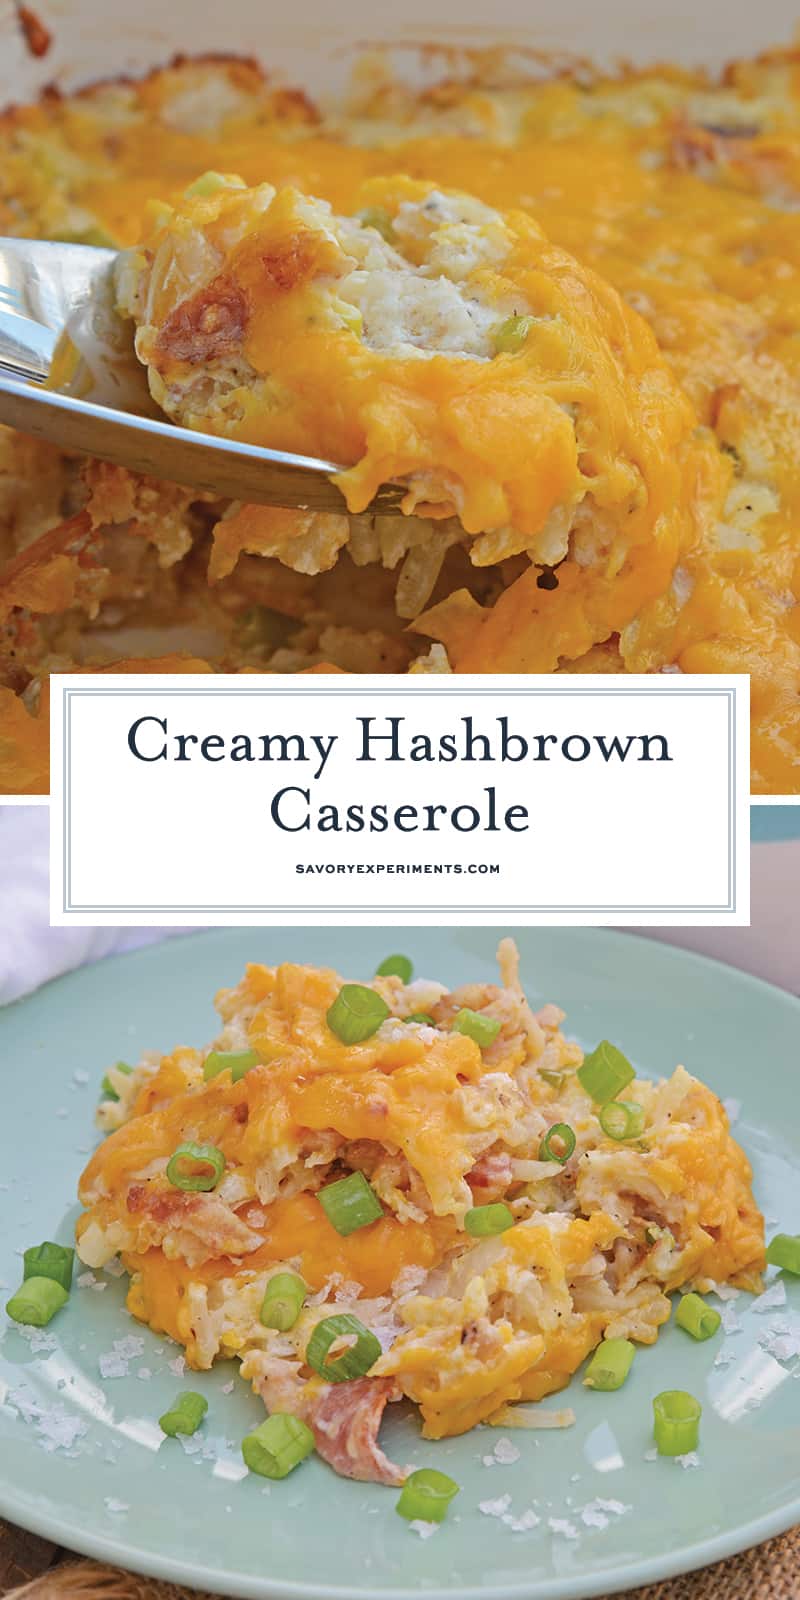 Hash Brown Casserole is great breakfast or brunch dish made with hash browns, onions, bacon and cheese. A delicious make ahead dish everyone will love! #funeralpotatoes #hashbrowncasseroles #potatohotdish www.savoryexperiments.com